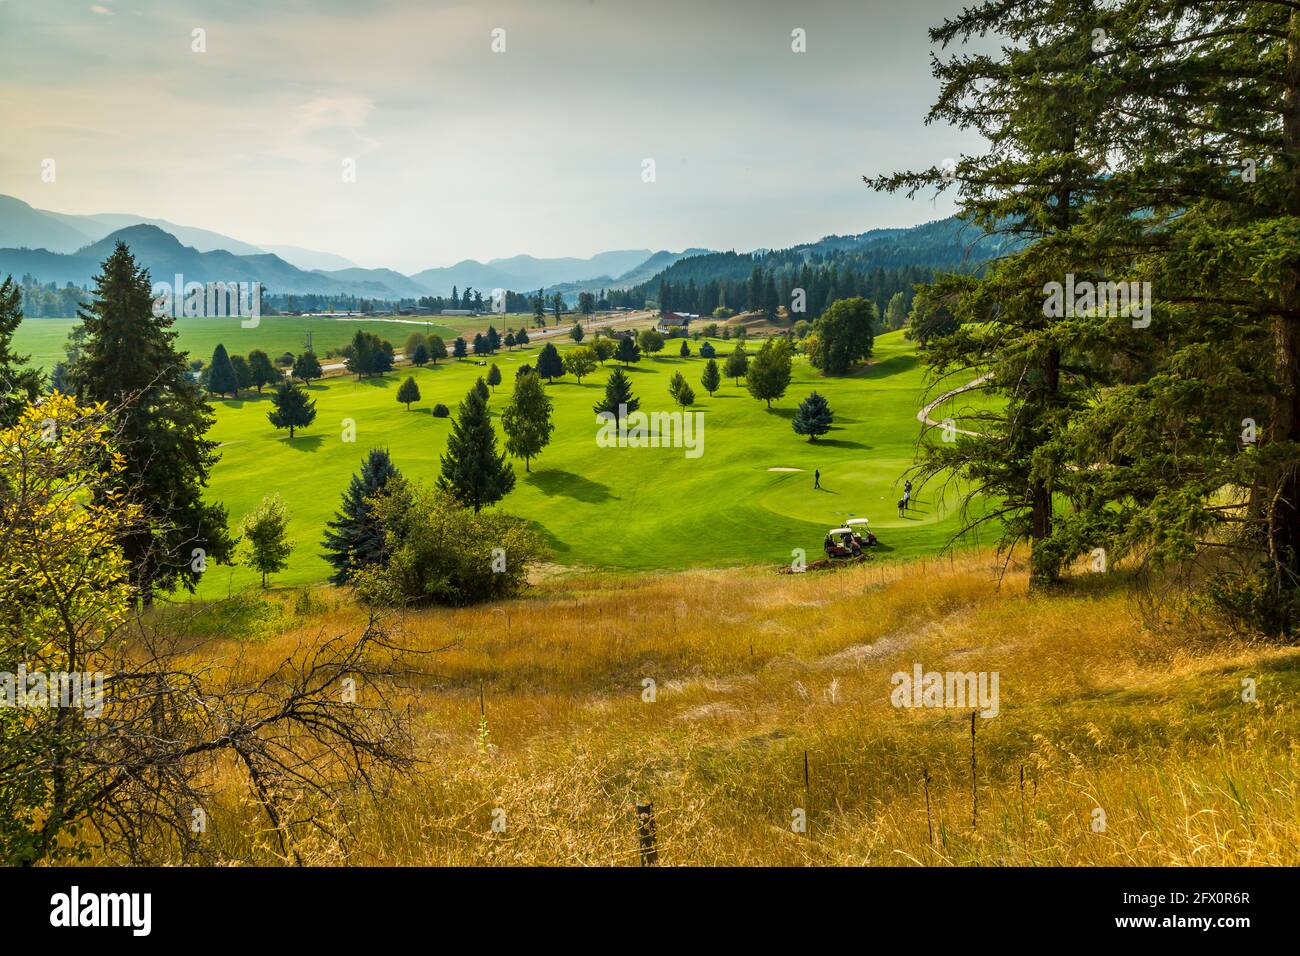 View of Chinook Cove Golf course near Kamloops, British Columbia, Canada, North America Stock Photo